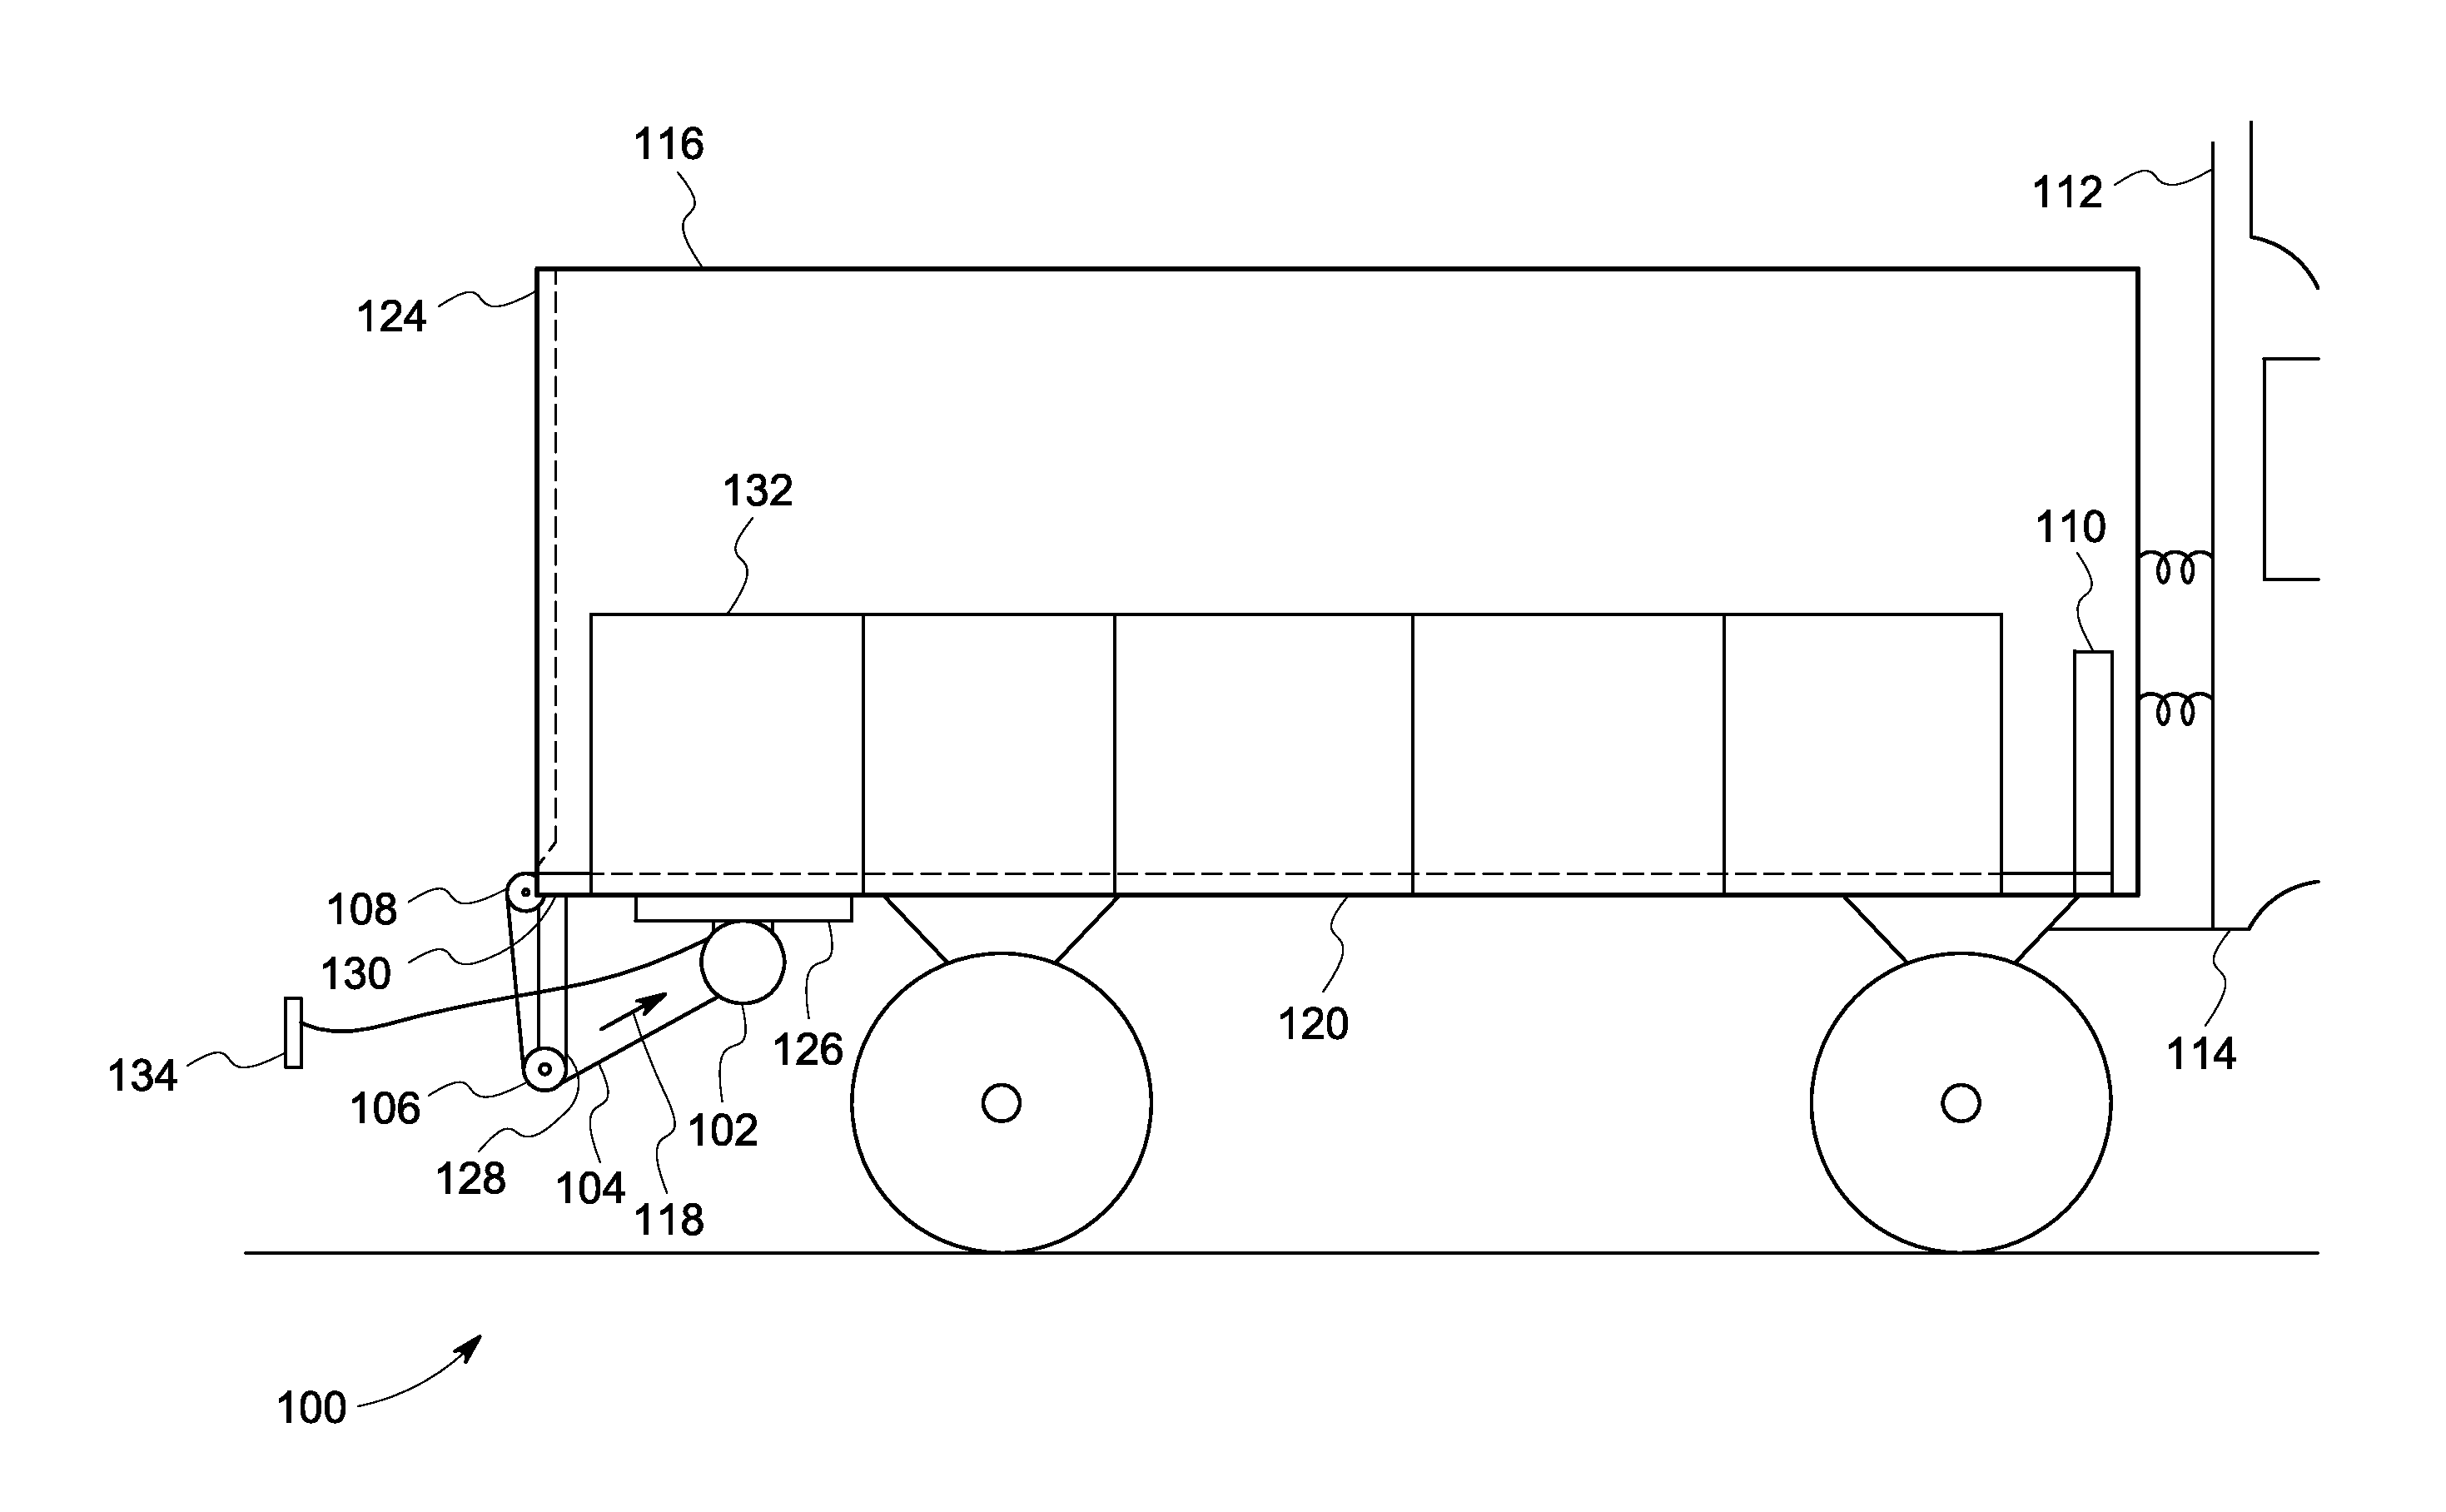 Apparatus and Method for Transferring Freight